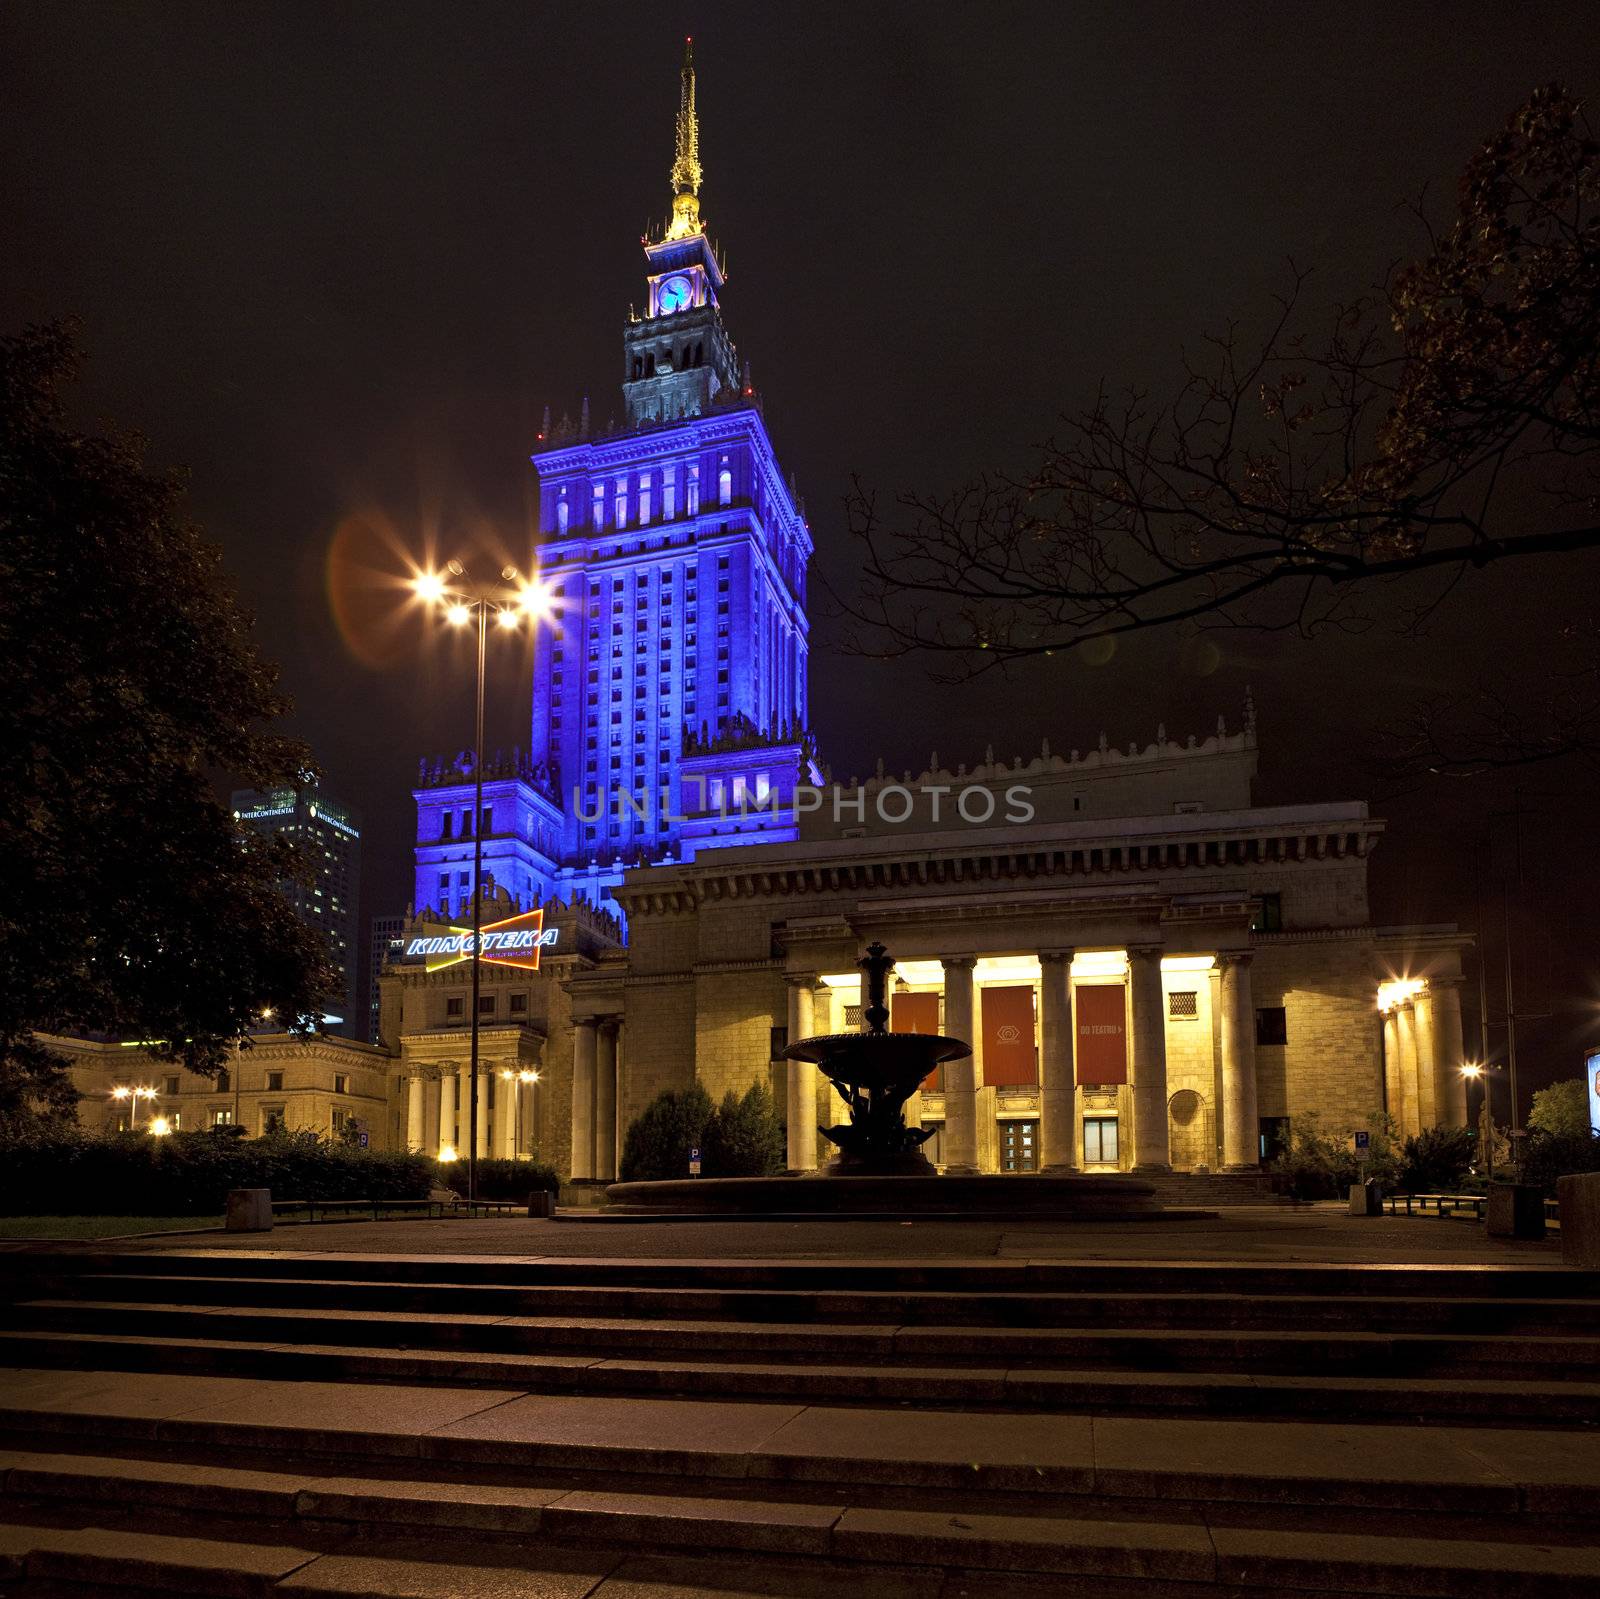 The Palace of Culture and Science in Warsaw by chrisdorney